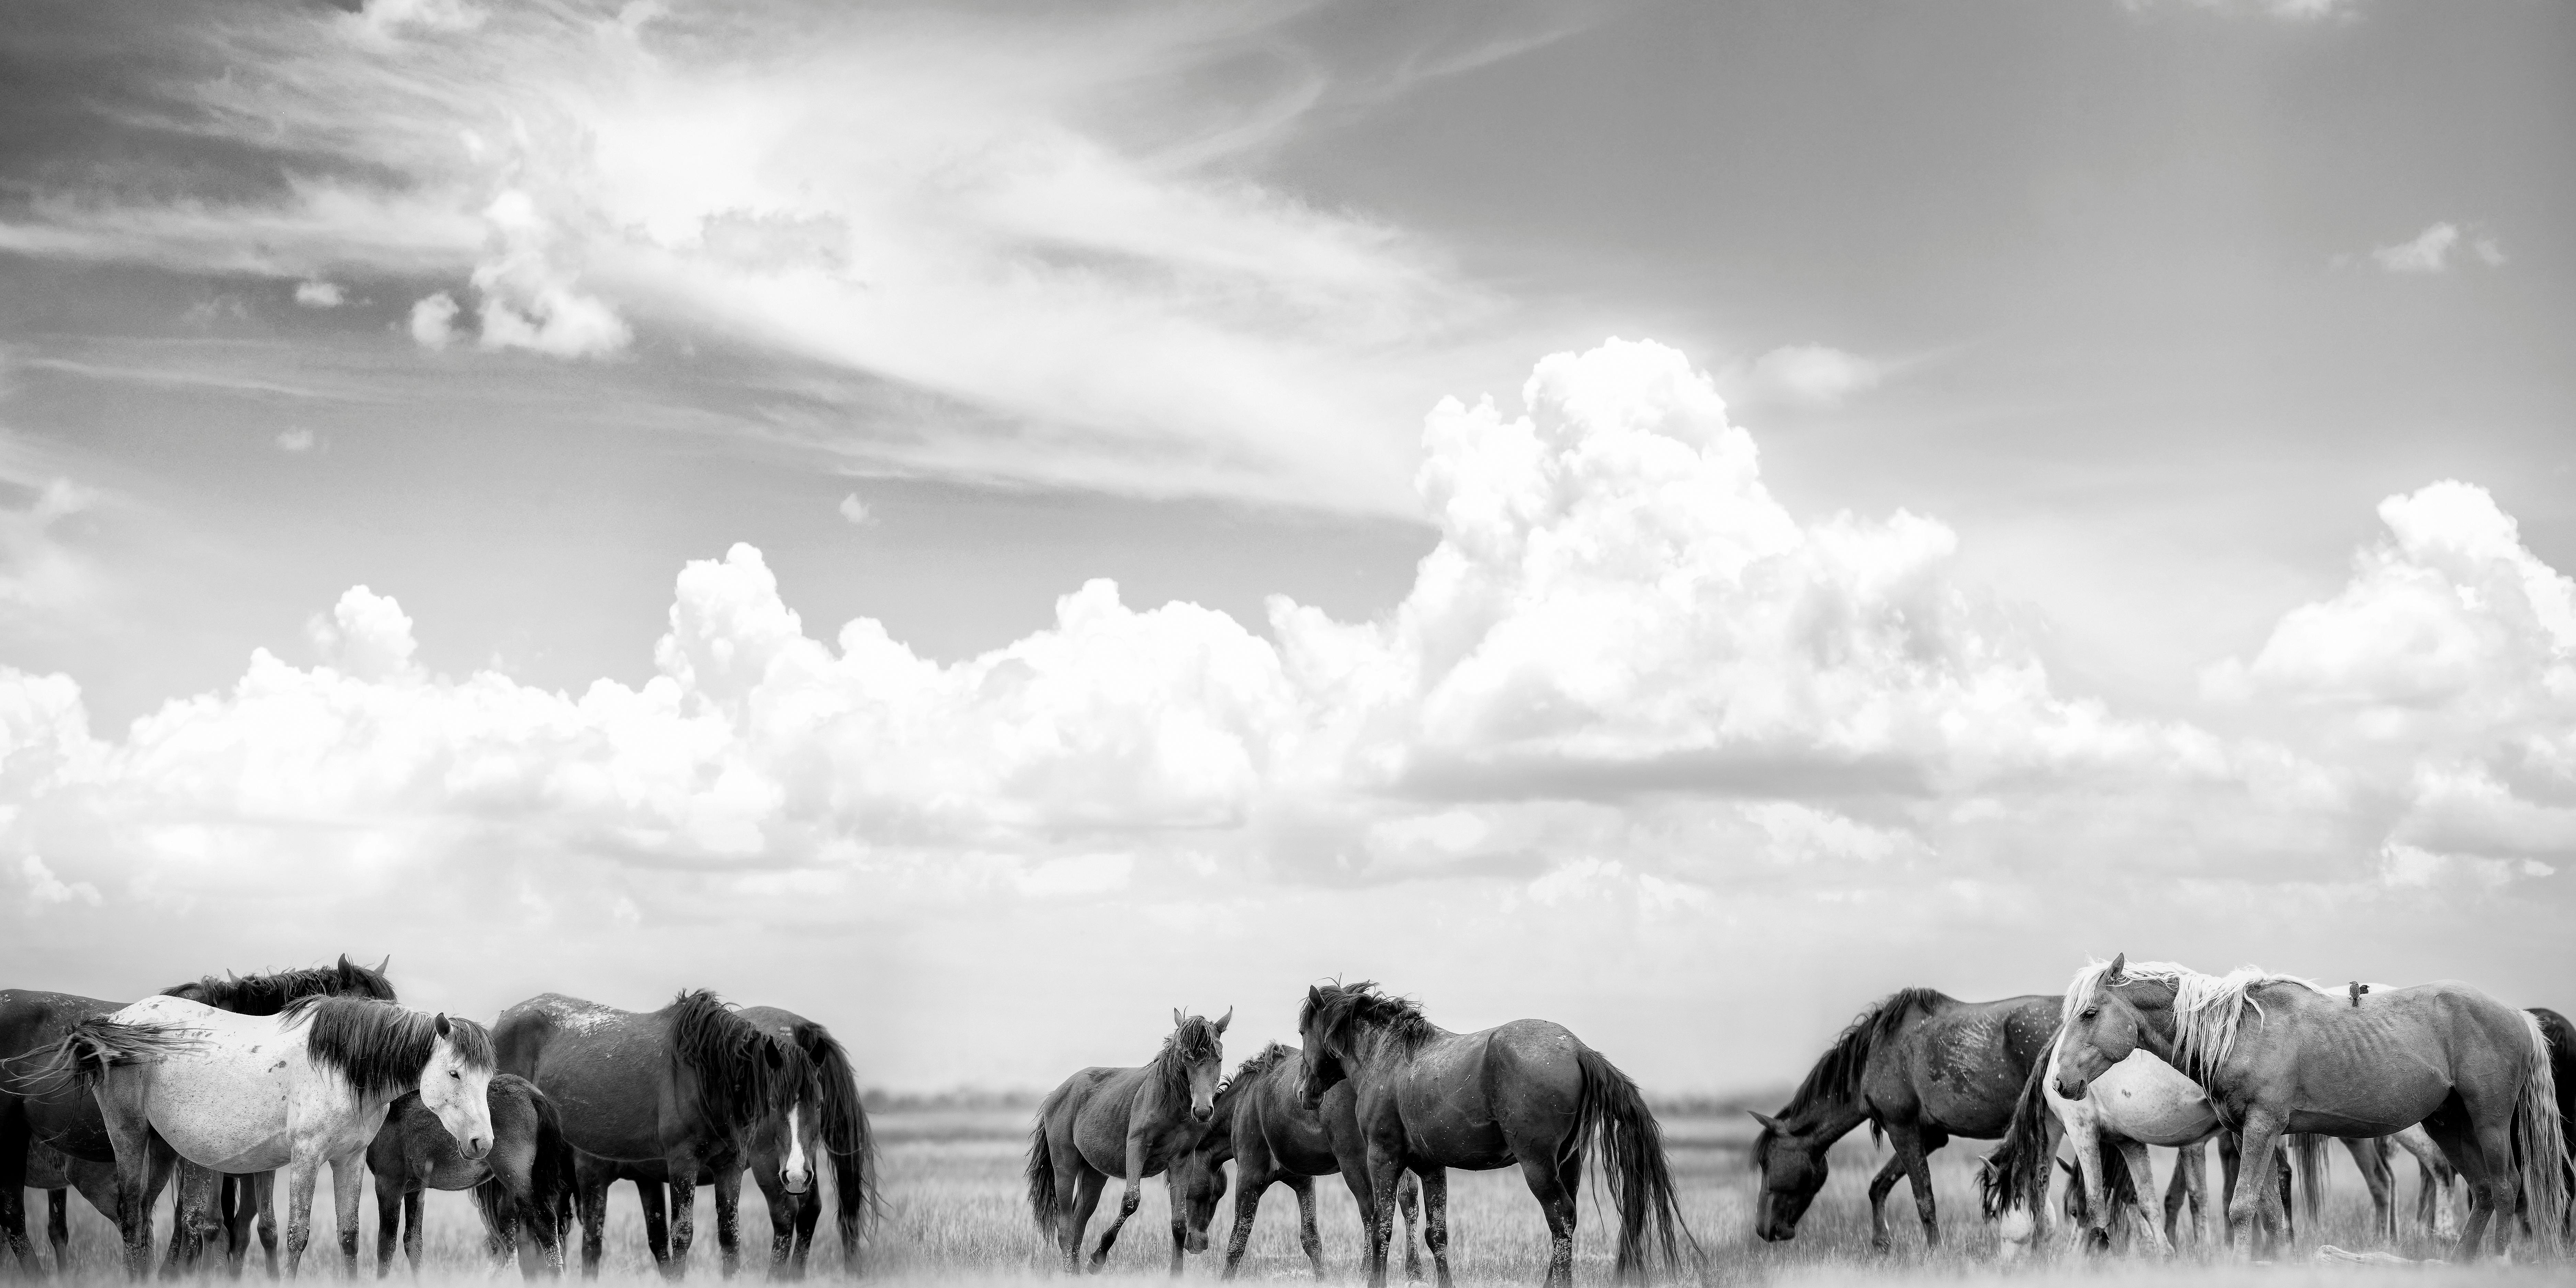 Shane Russeck Animal Print - "On Any Sunday" - 50x25 Wild Horses, Mustangs Photography, Fine Art Photograph